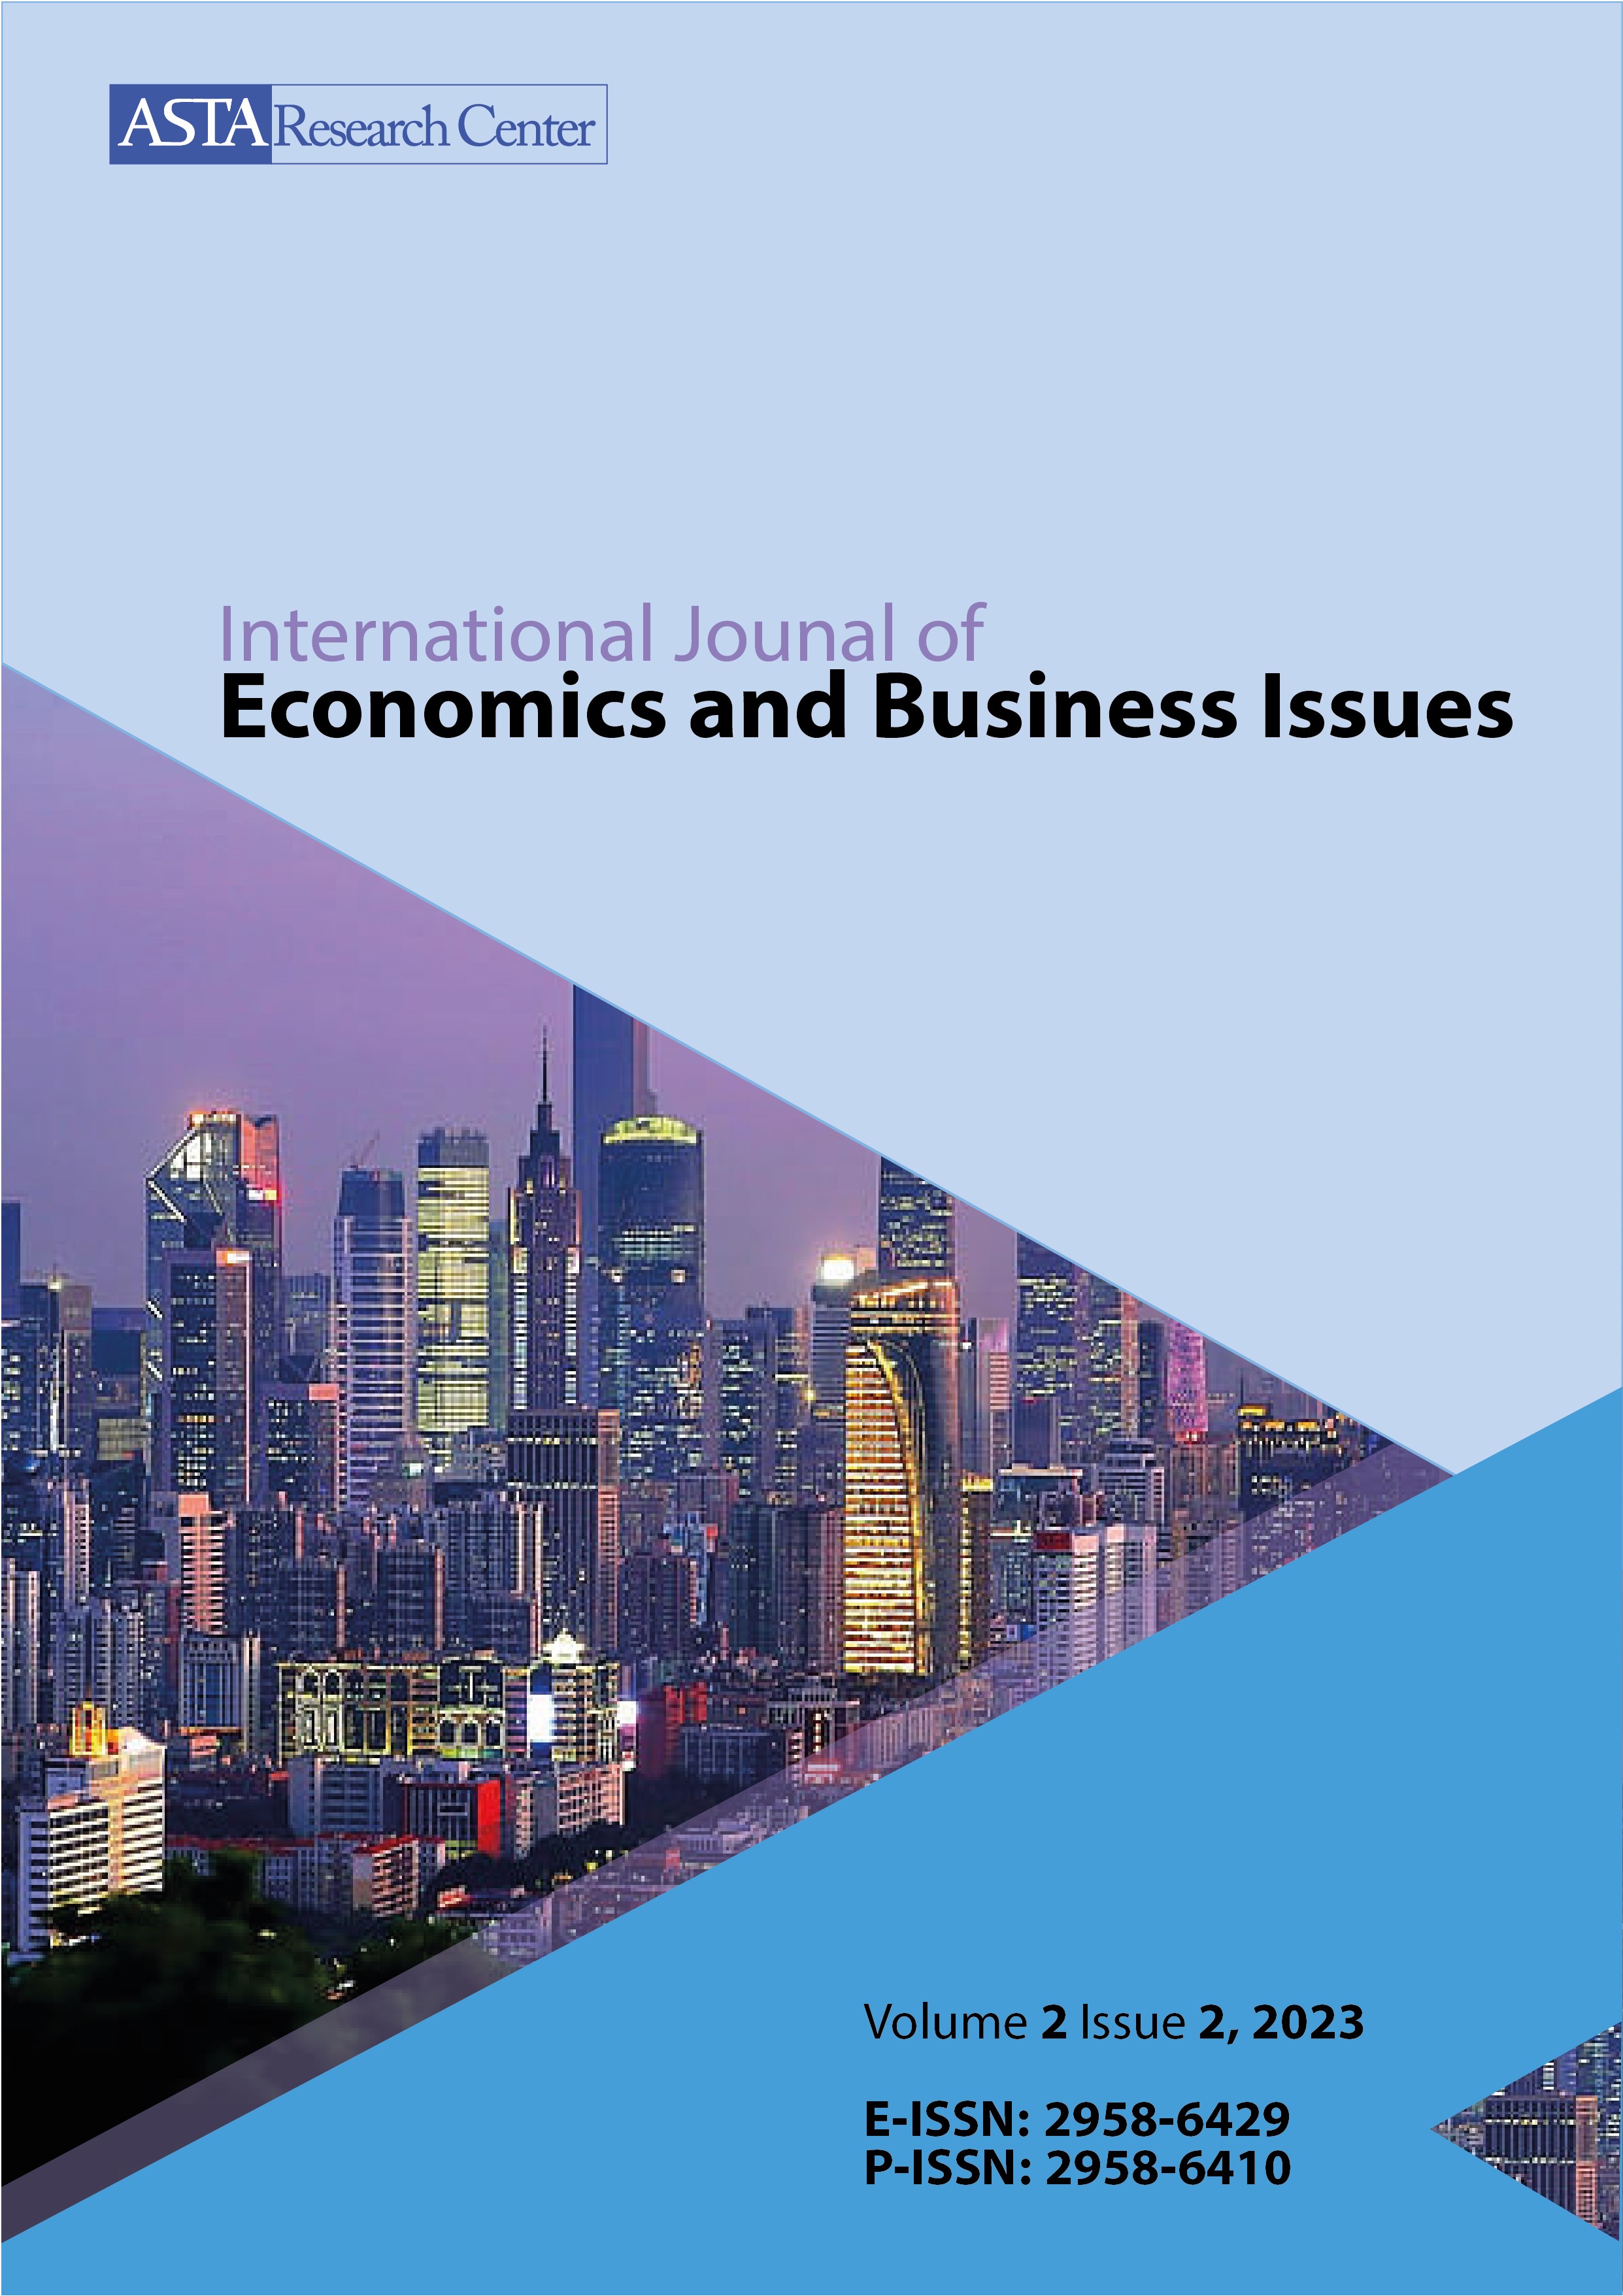 					View Vol. 2 No. 2 (2023): International Journal of Economics and Business Issues
				